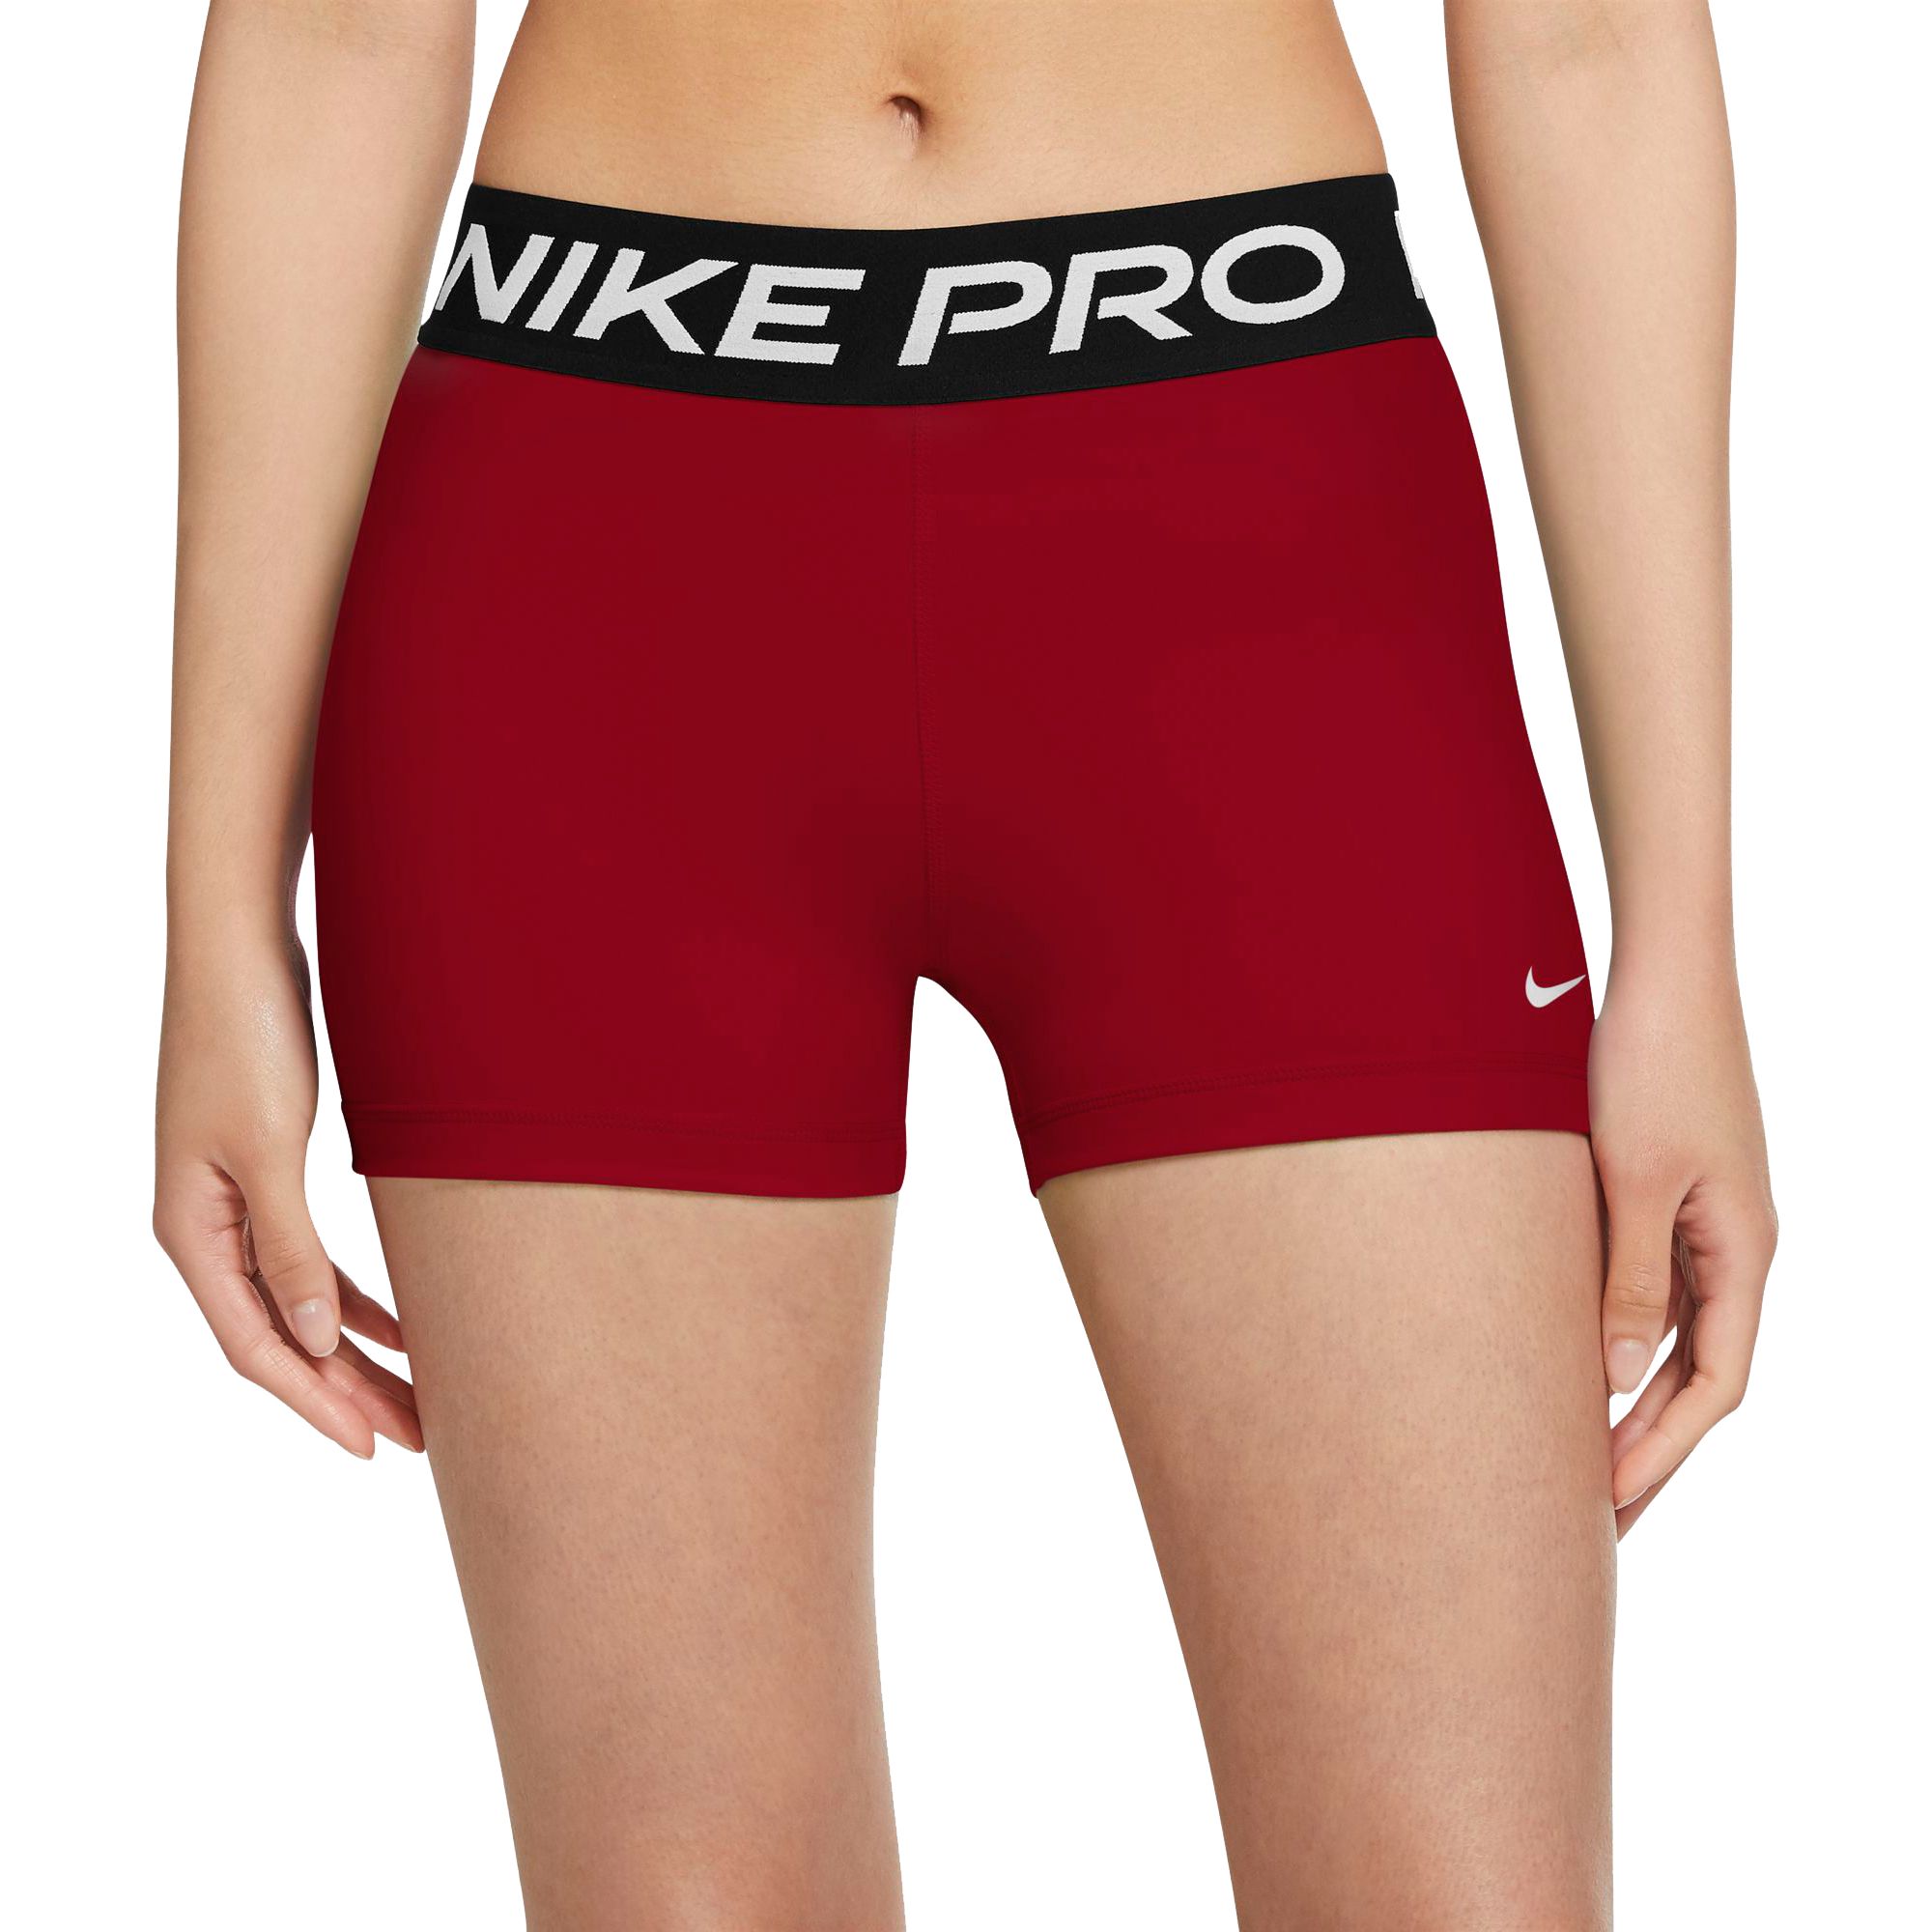 Over instelling Voorlopige naam Vertrappen Nike [S] Women's Pro 3'' Training Shorts, Gym Red/Black/White, Style:  CZ9857-687 – VALLEYSPORTING